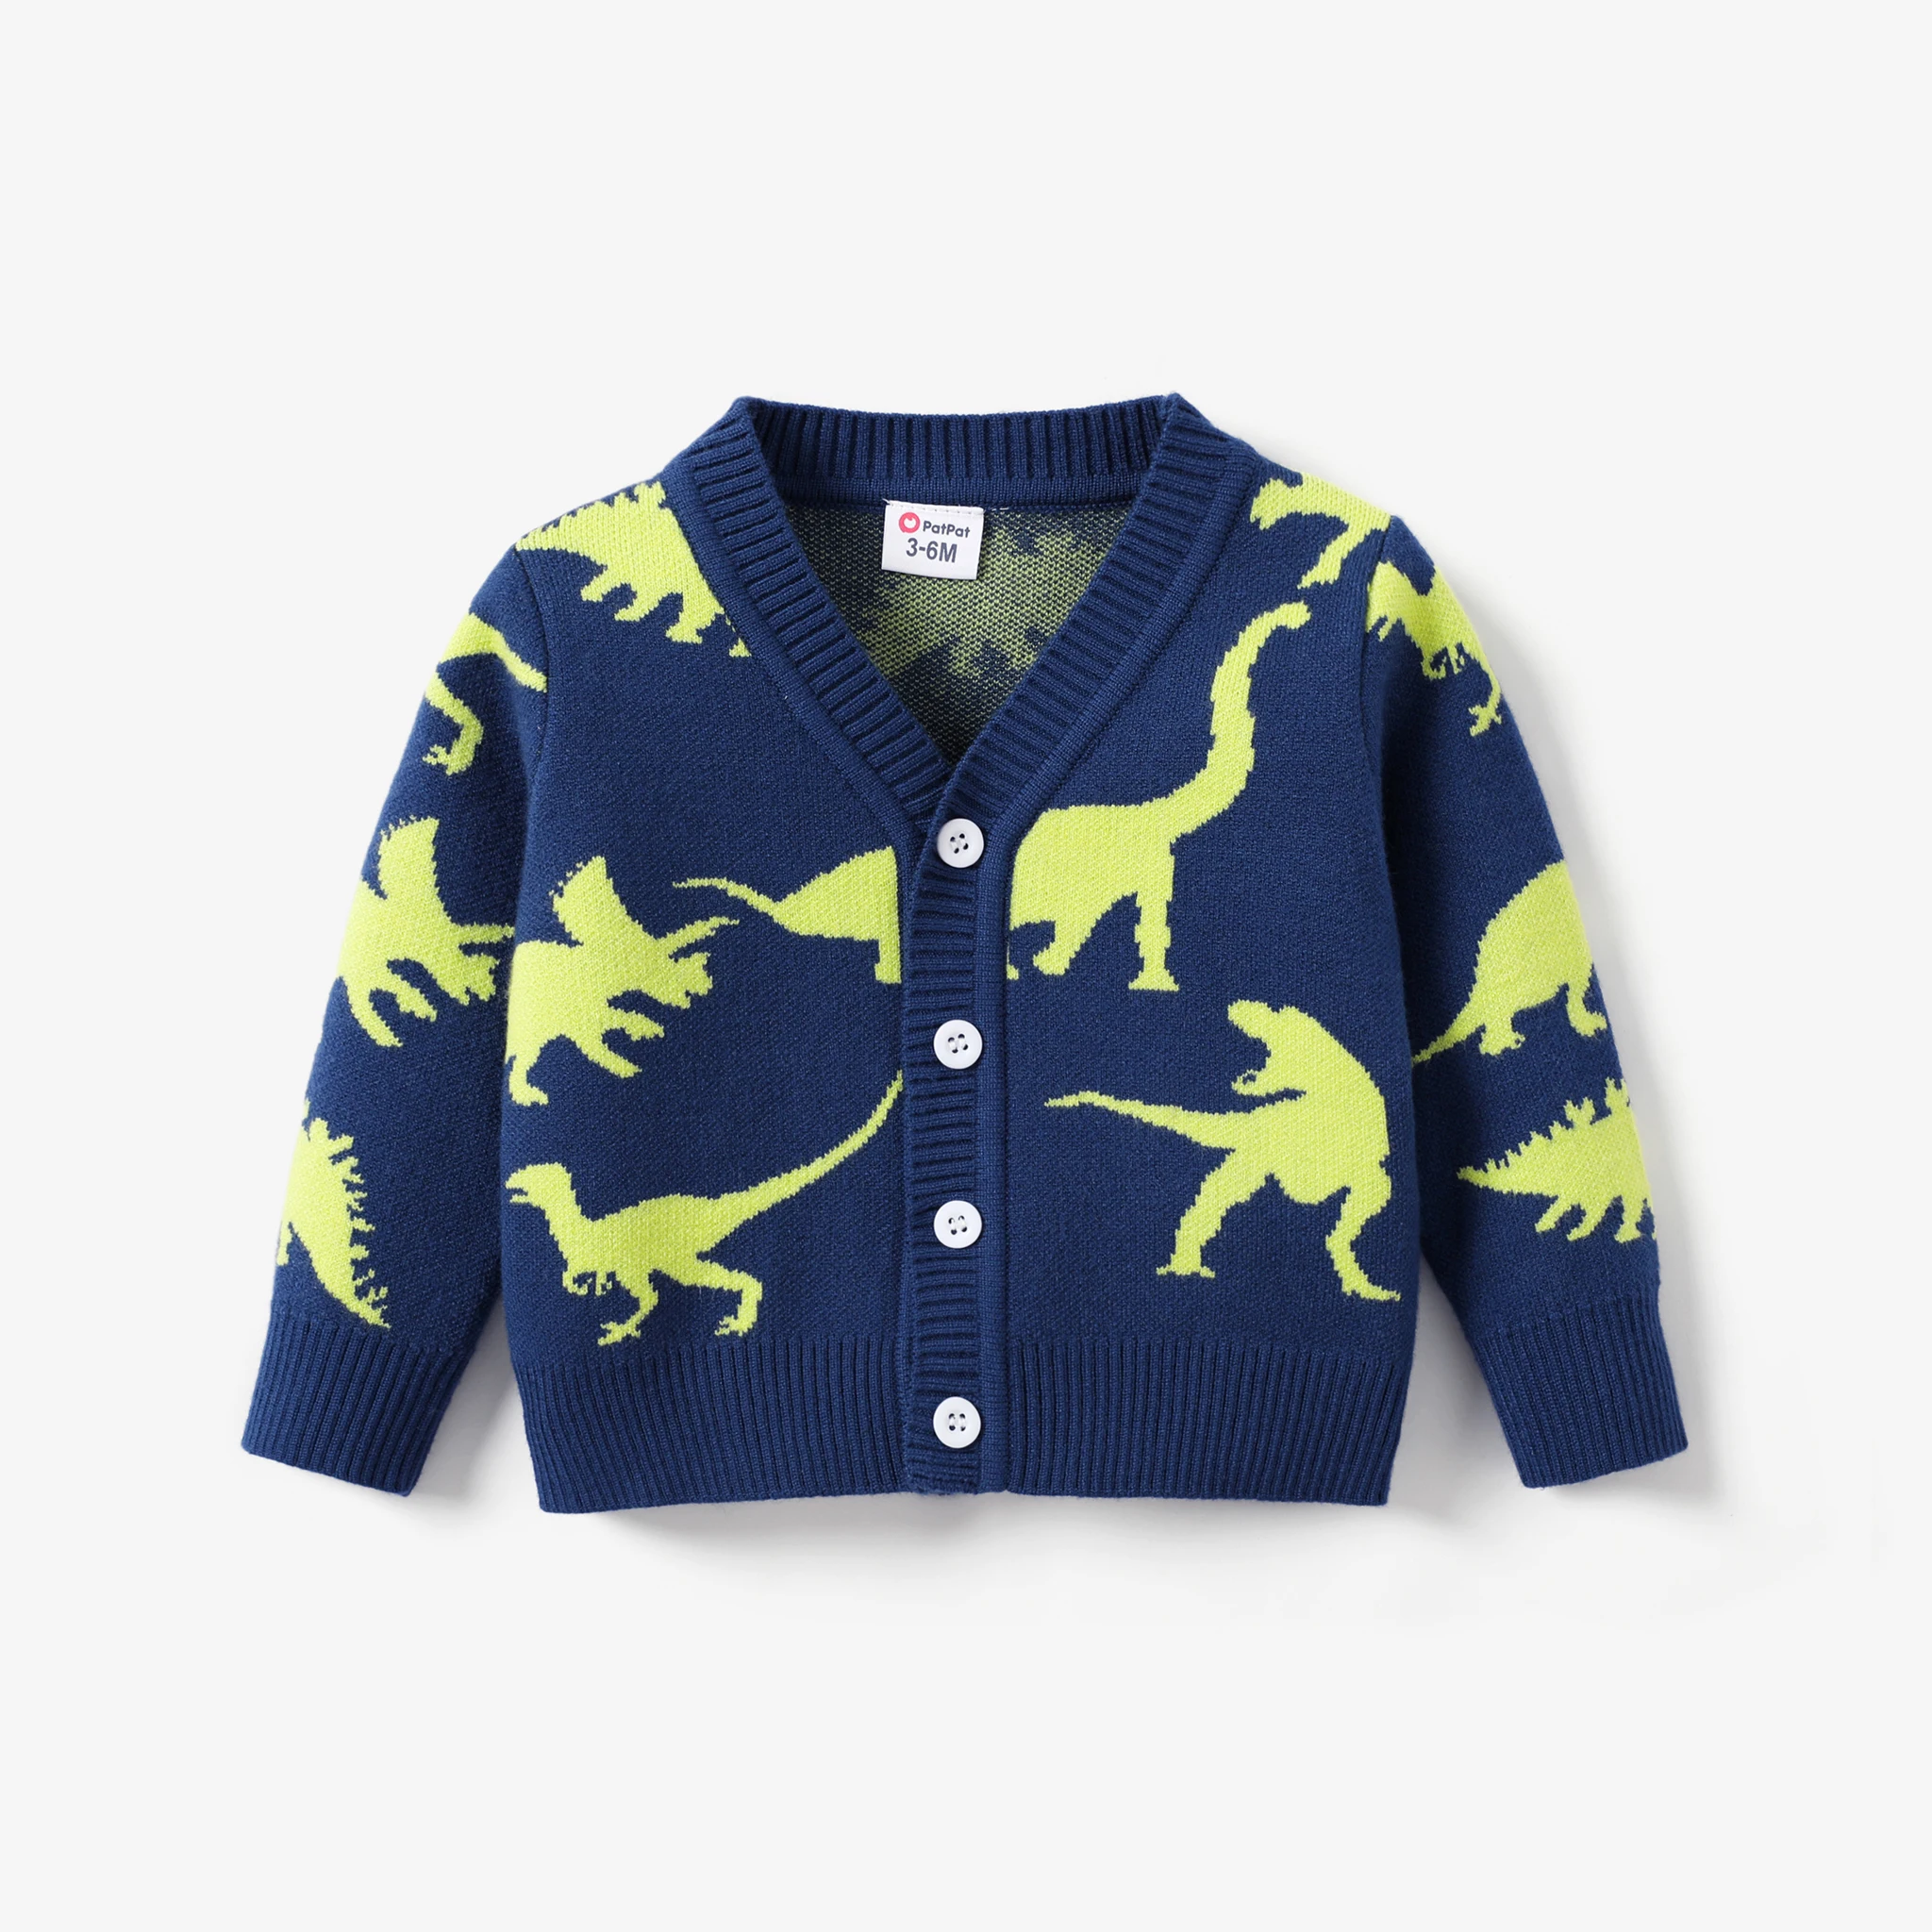 

PatPat Baby/Toddler Boy Childlike Dinosaur Knitted Sweater with Secret Button